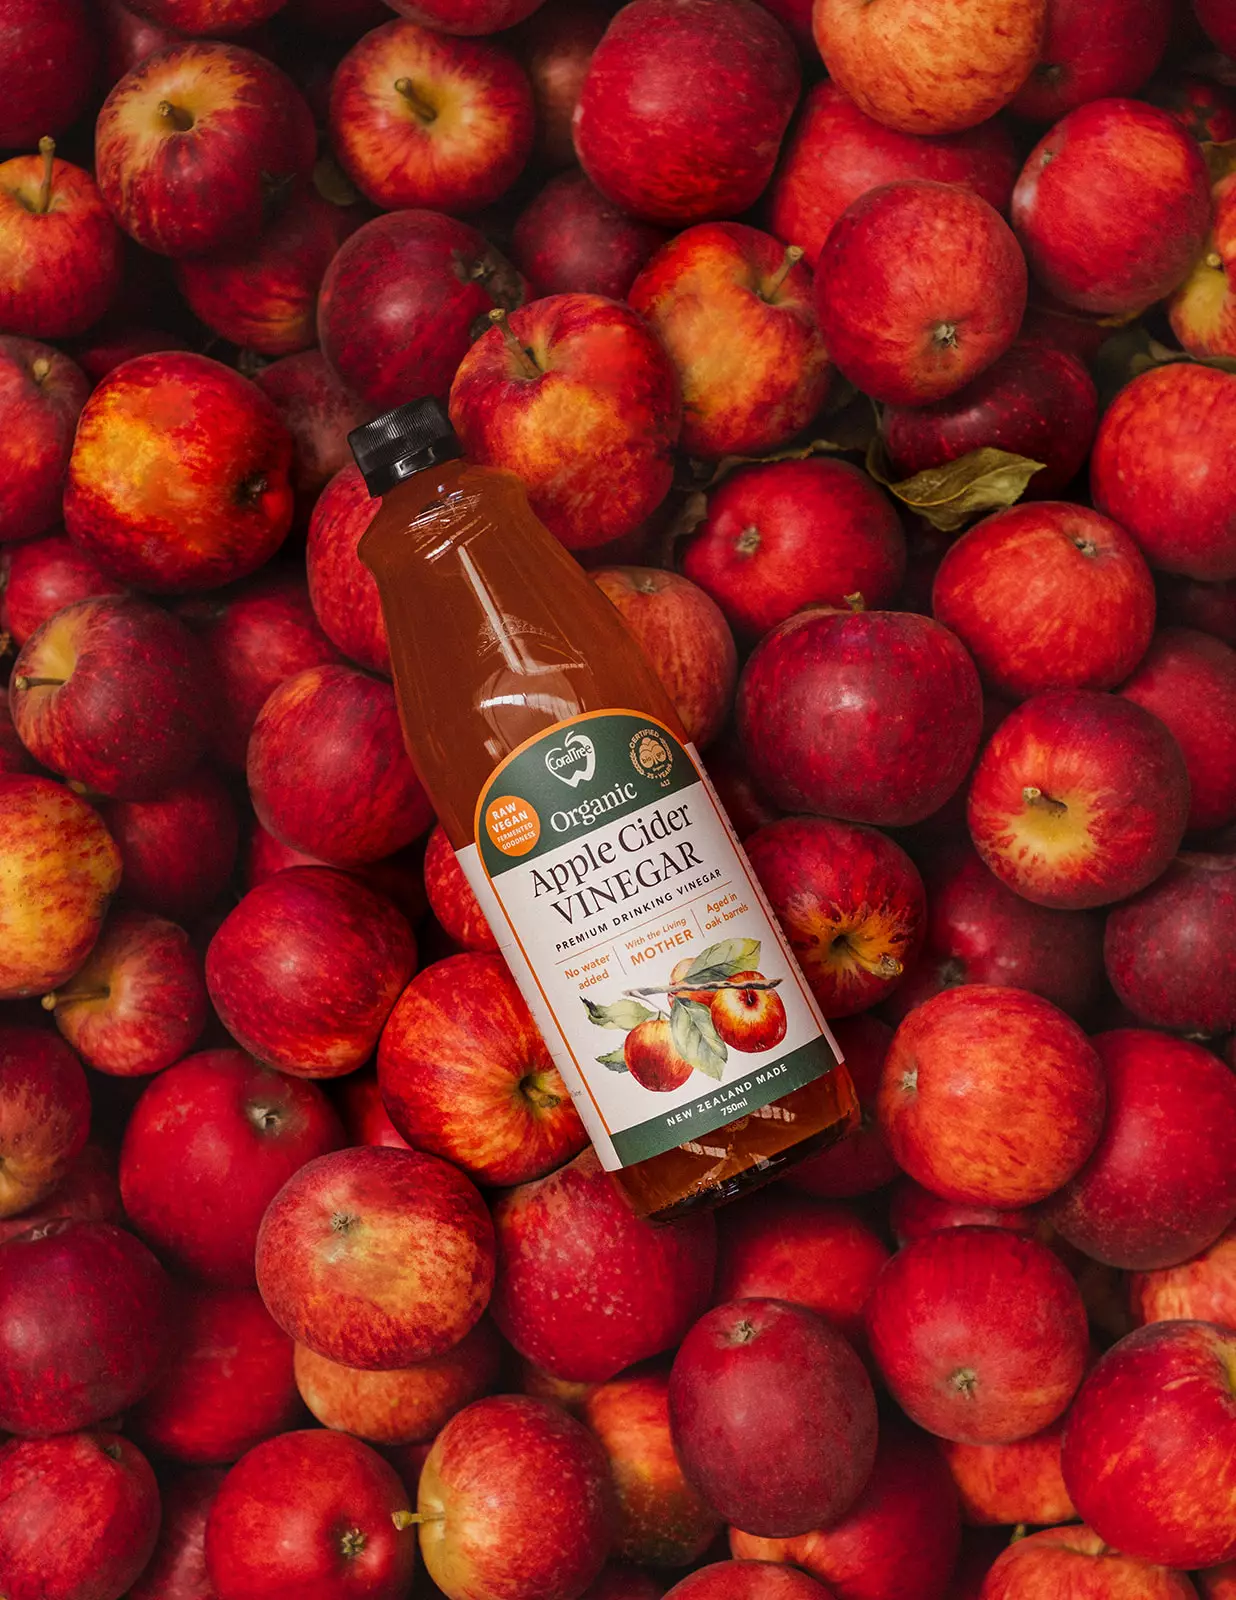 Photo of a 750ml Bottle of Vinegar sits on top of fresh bright red apples.